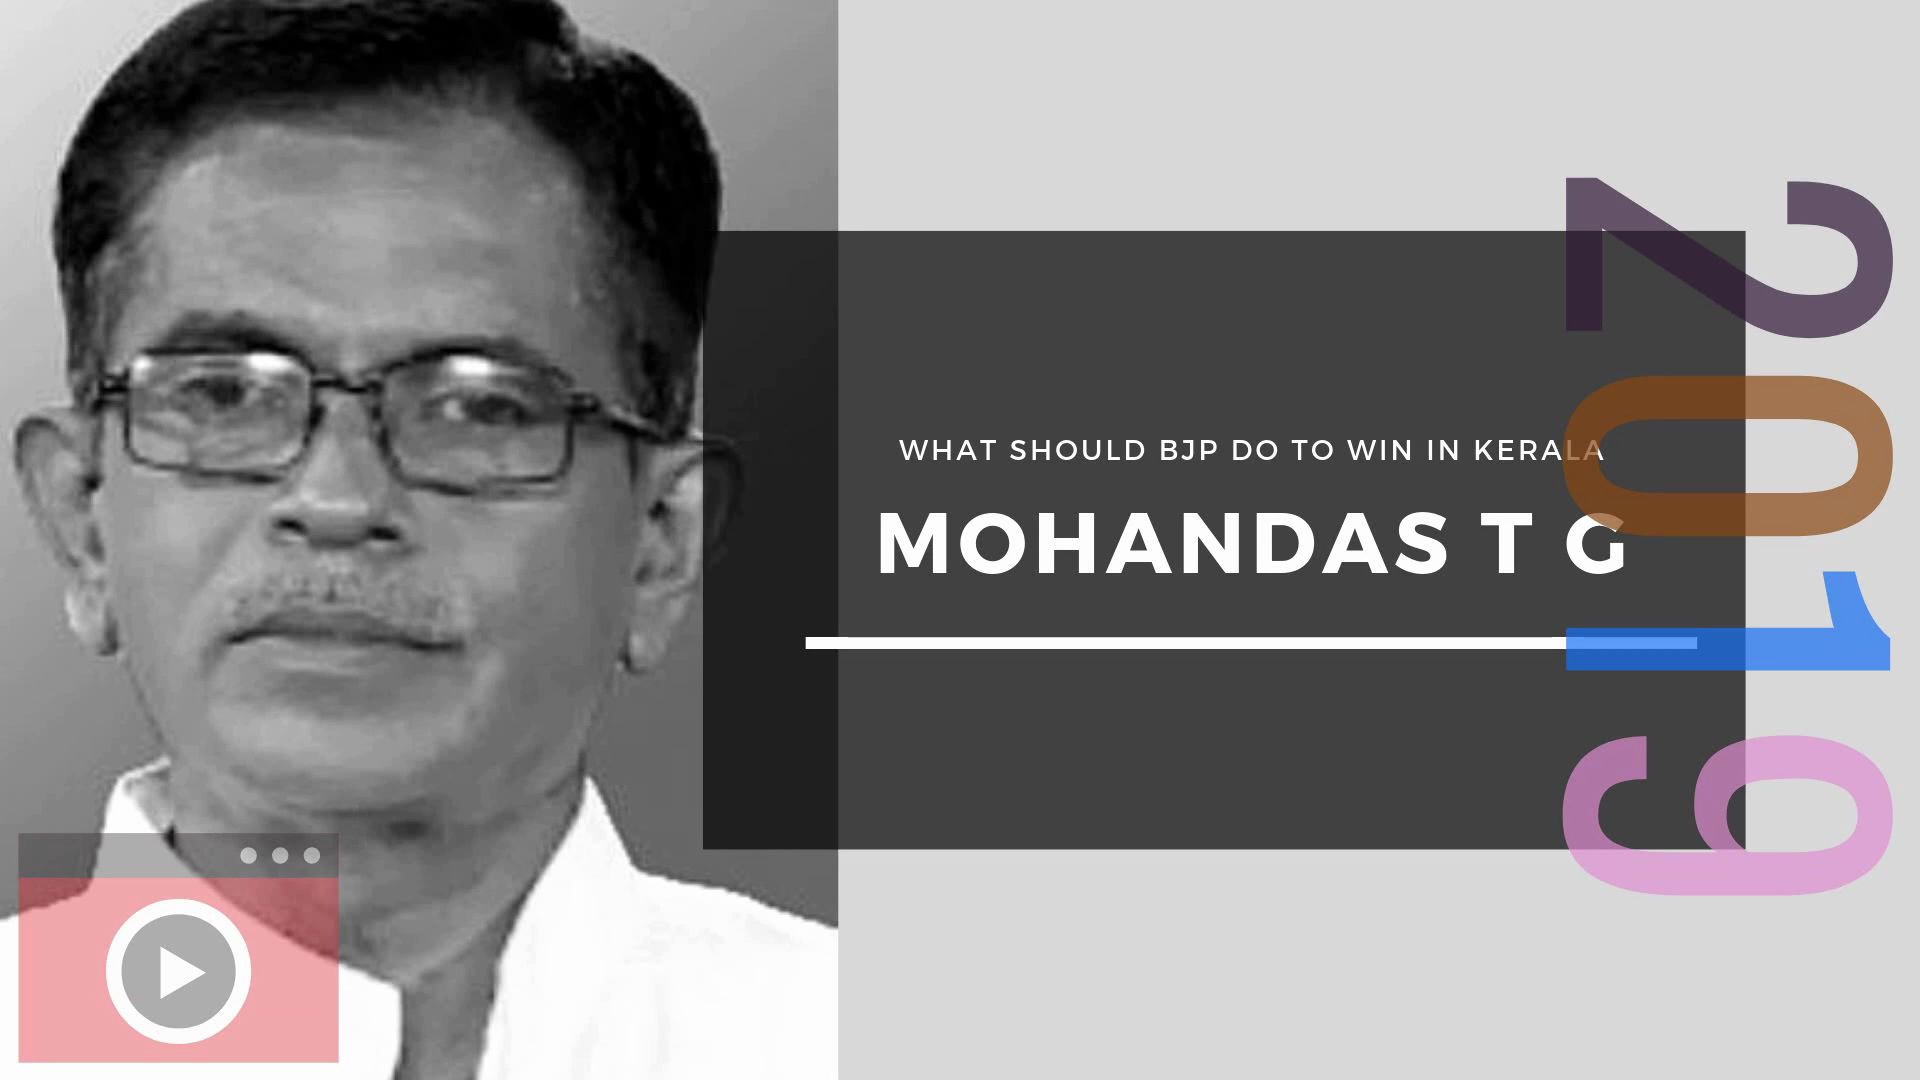 With thousands of its karyakartas still in jail, will BJP manage to overcome the strategic voting that takes place in Kerala and make a mark in 2019? Mohandas T G discusses...